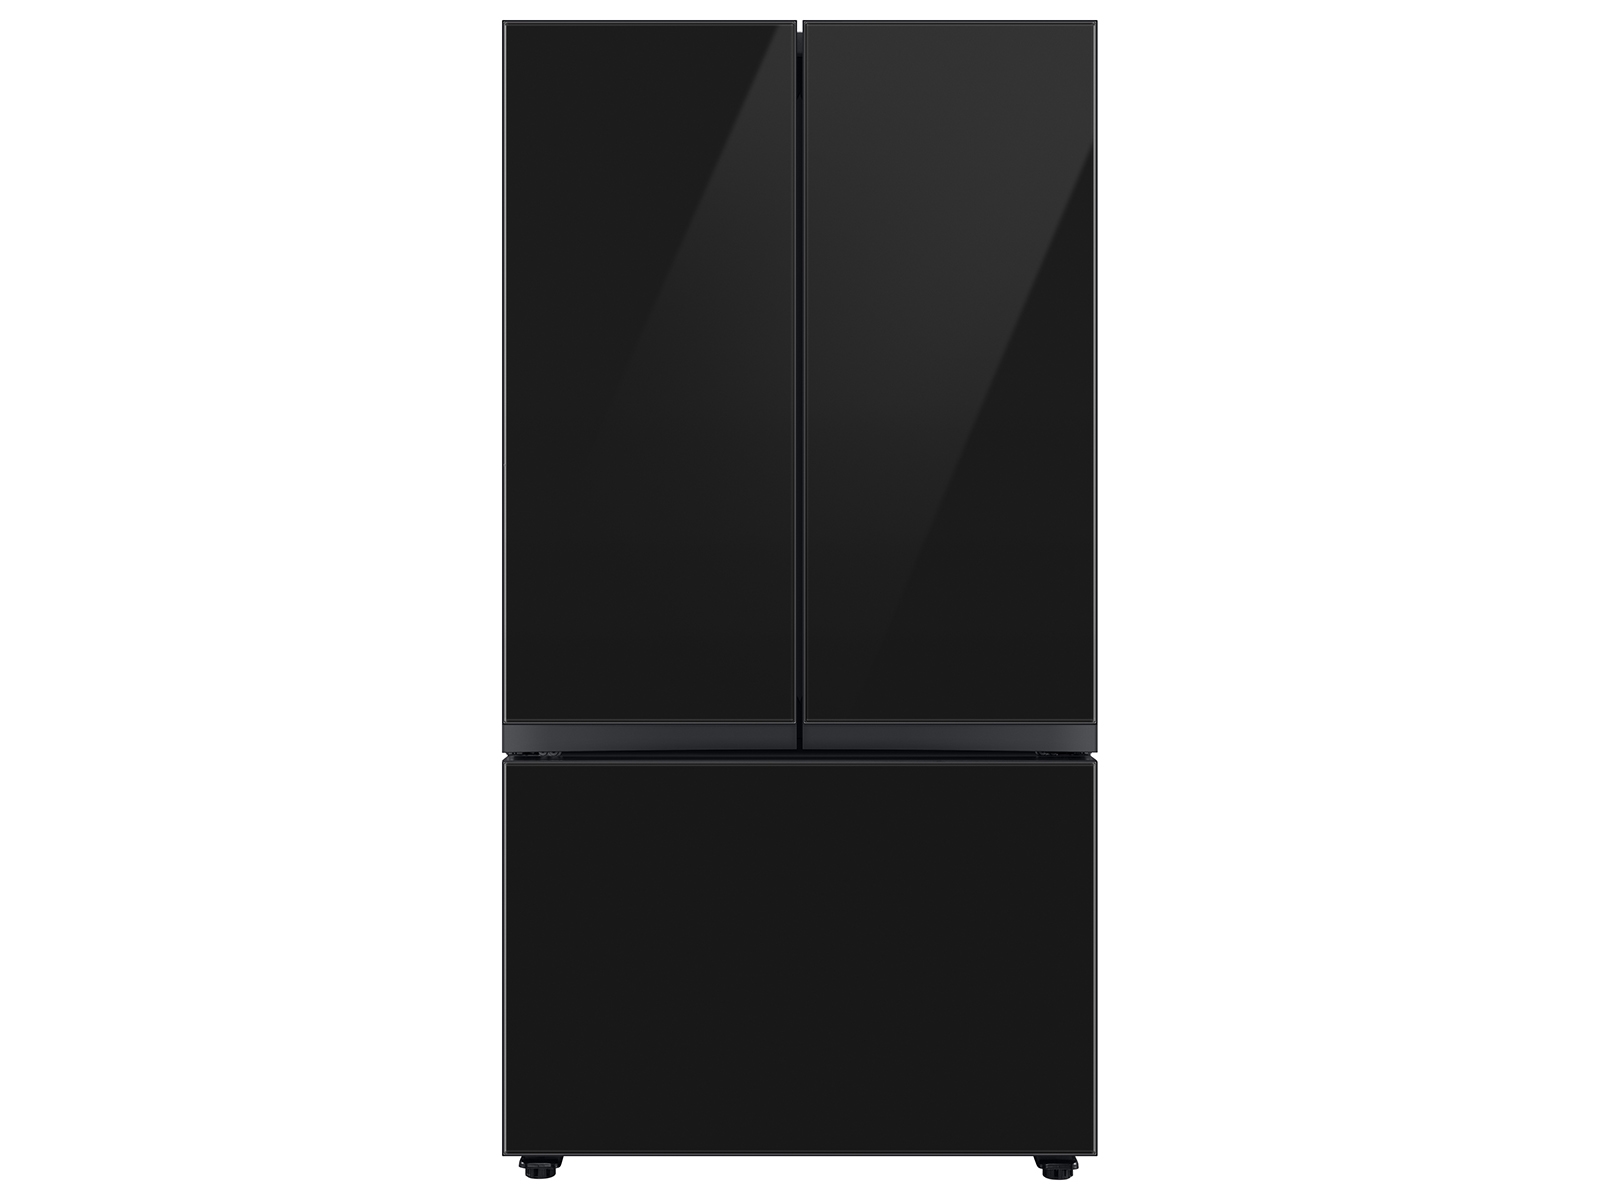 Samsung Bespoke 3-Door French Door Refrigerator (24 cu. ft.) with AutoFill Water Pitcher in Charcoal Glass(BNDL-1650393215140)